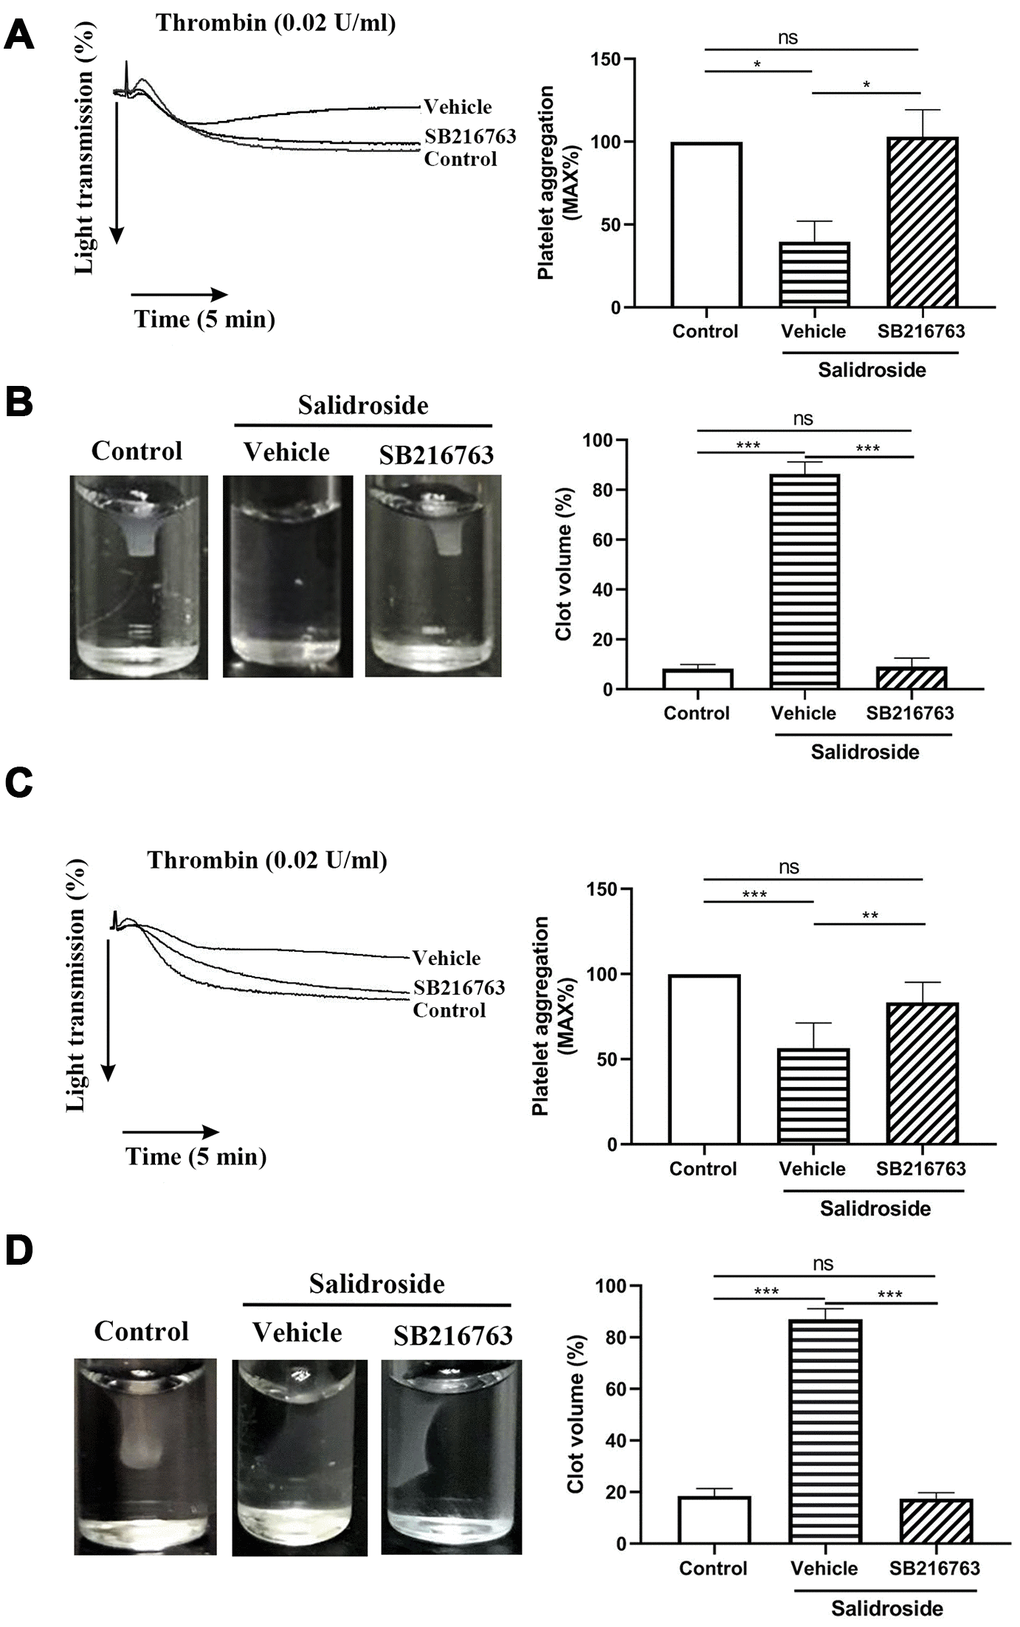 Effect of inhibition of GSK3β on platelet function. Washed human (A and B) or mouse (C and D) platelets were pretreated with GSK3β inhibitor SB216763 (10 μM) for 2 h at 37C followed by treated with salidroside (20 μM) at 37 for 1 h. After that, platelet aggregation in response to thrombin (A and C) and clot retraction (B and D) was performed. The clot image was captured at 60 min after initiation. Data were shown as mean ± SE (n = 4) and analyzed by one-way ANOVA. *P 